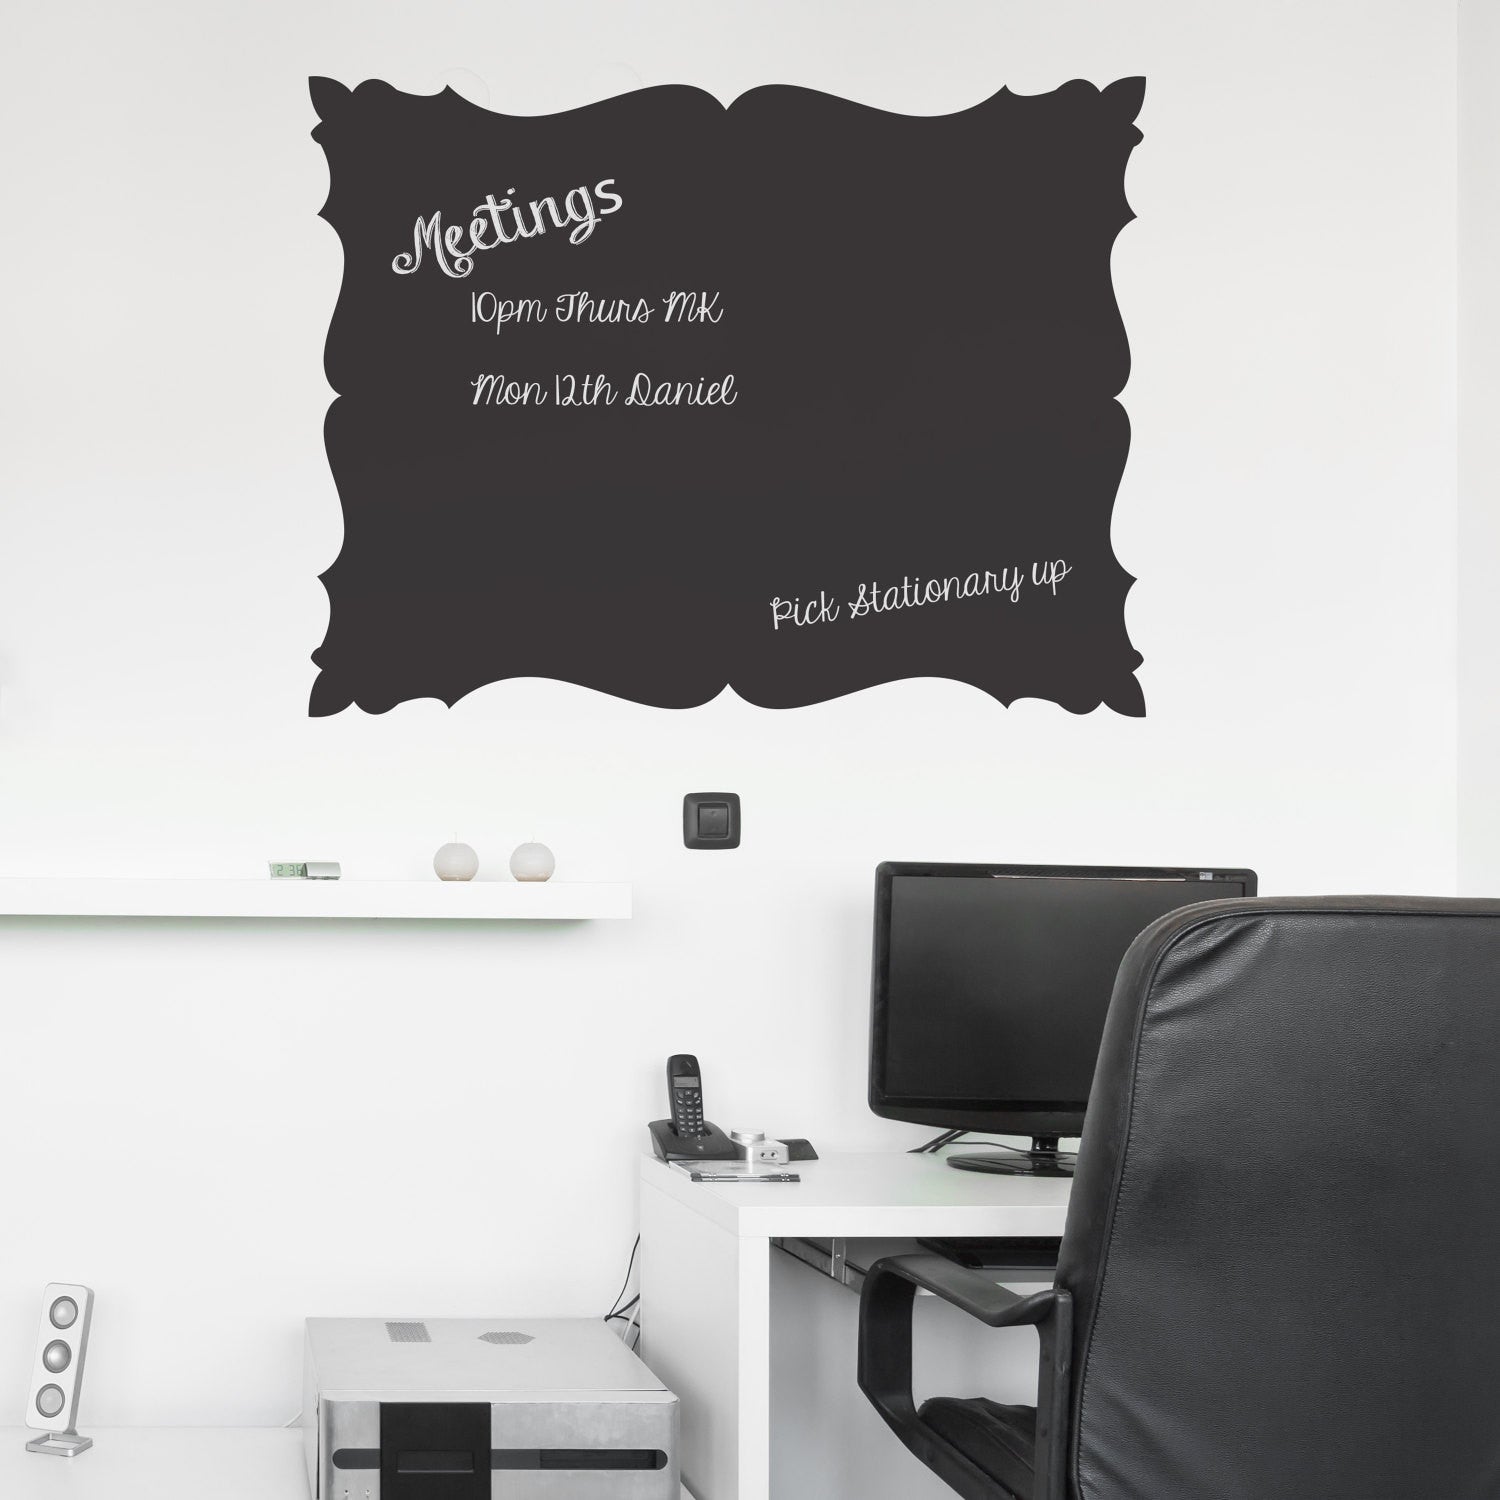 Baroque Chalkboard Wall Sticker. Shows one panel in A2, can be used as a noticeboard or planner. shown as black chalkboard vinyl on a white wall. Also available in sizes A4, A3, A1 and A0